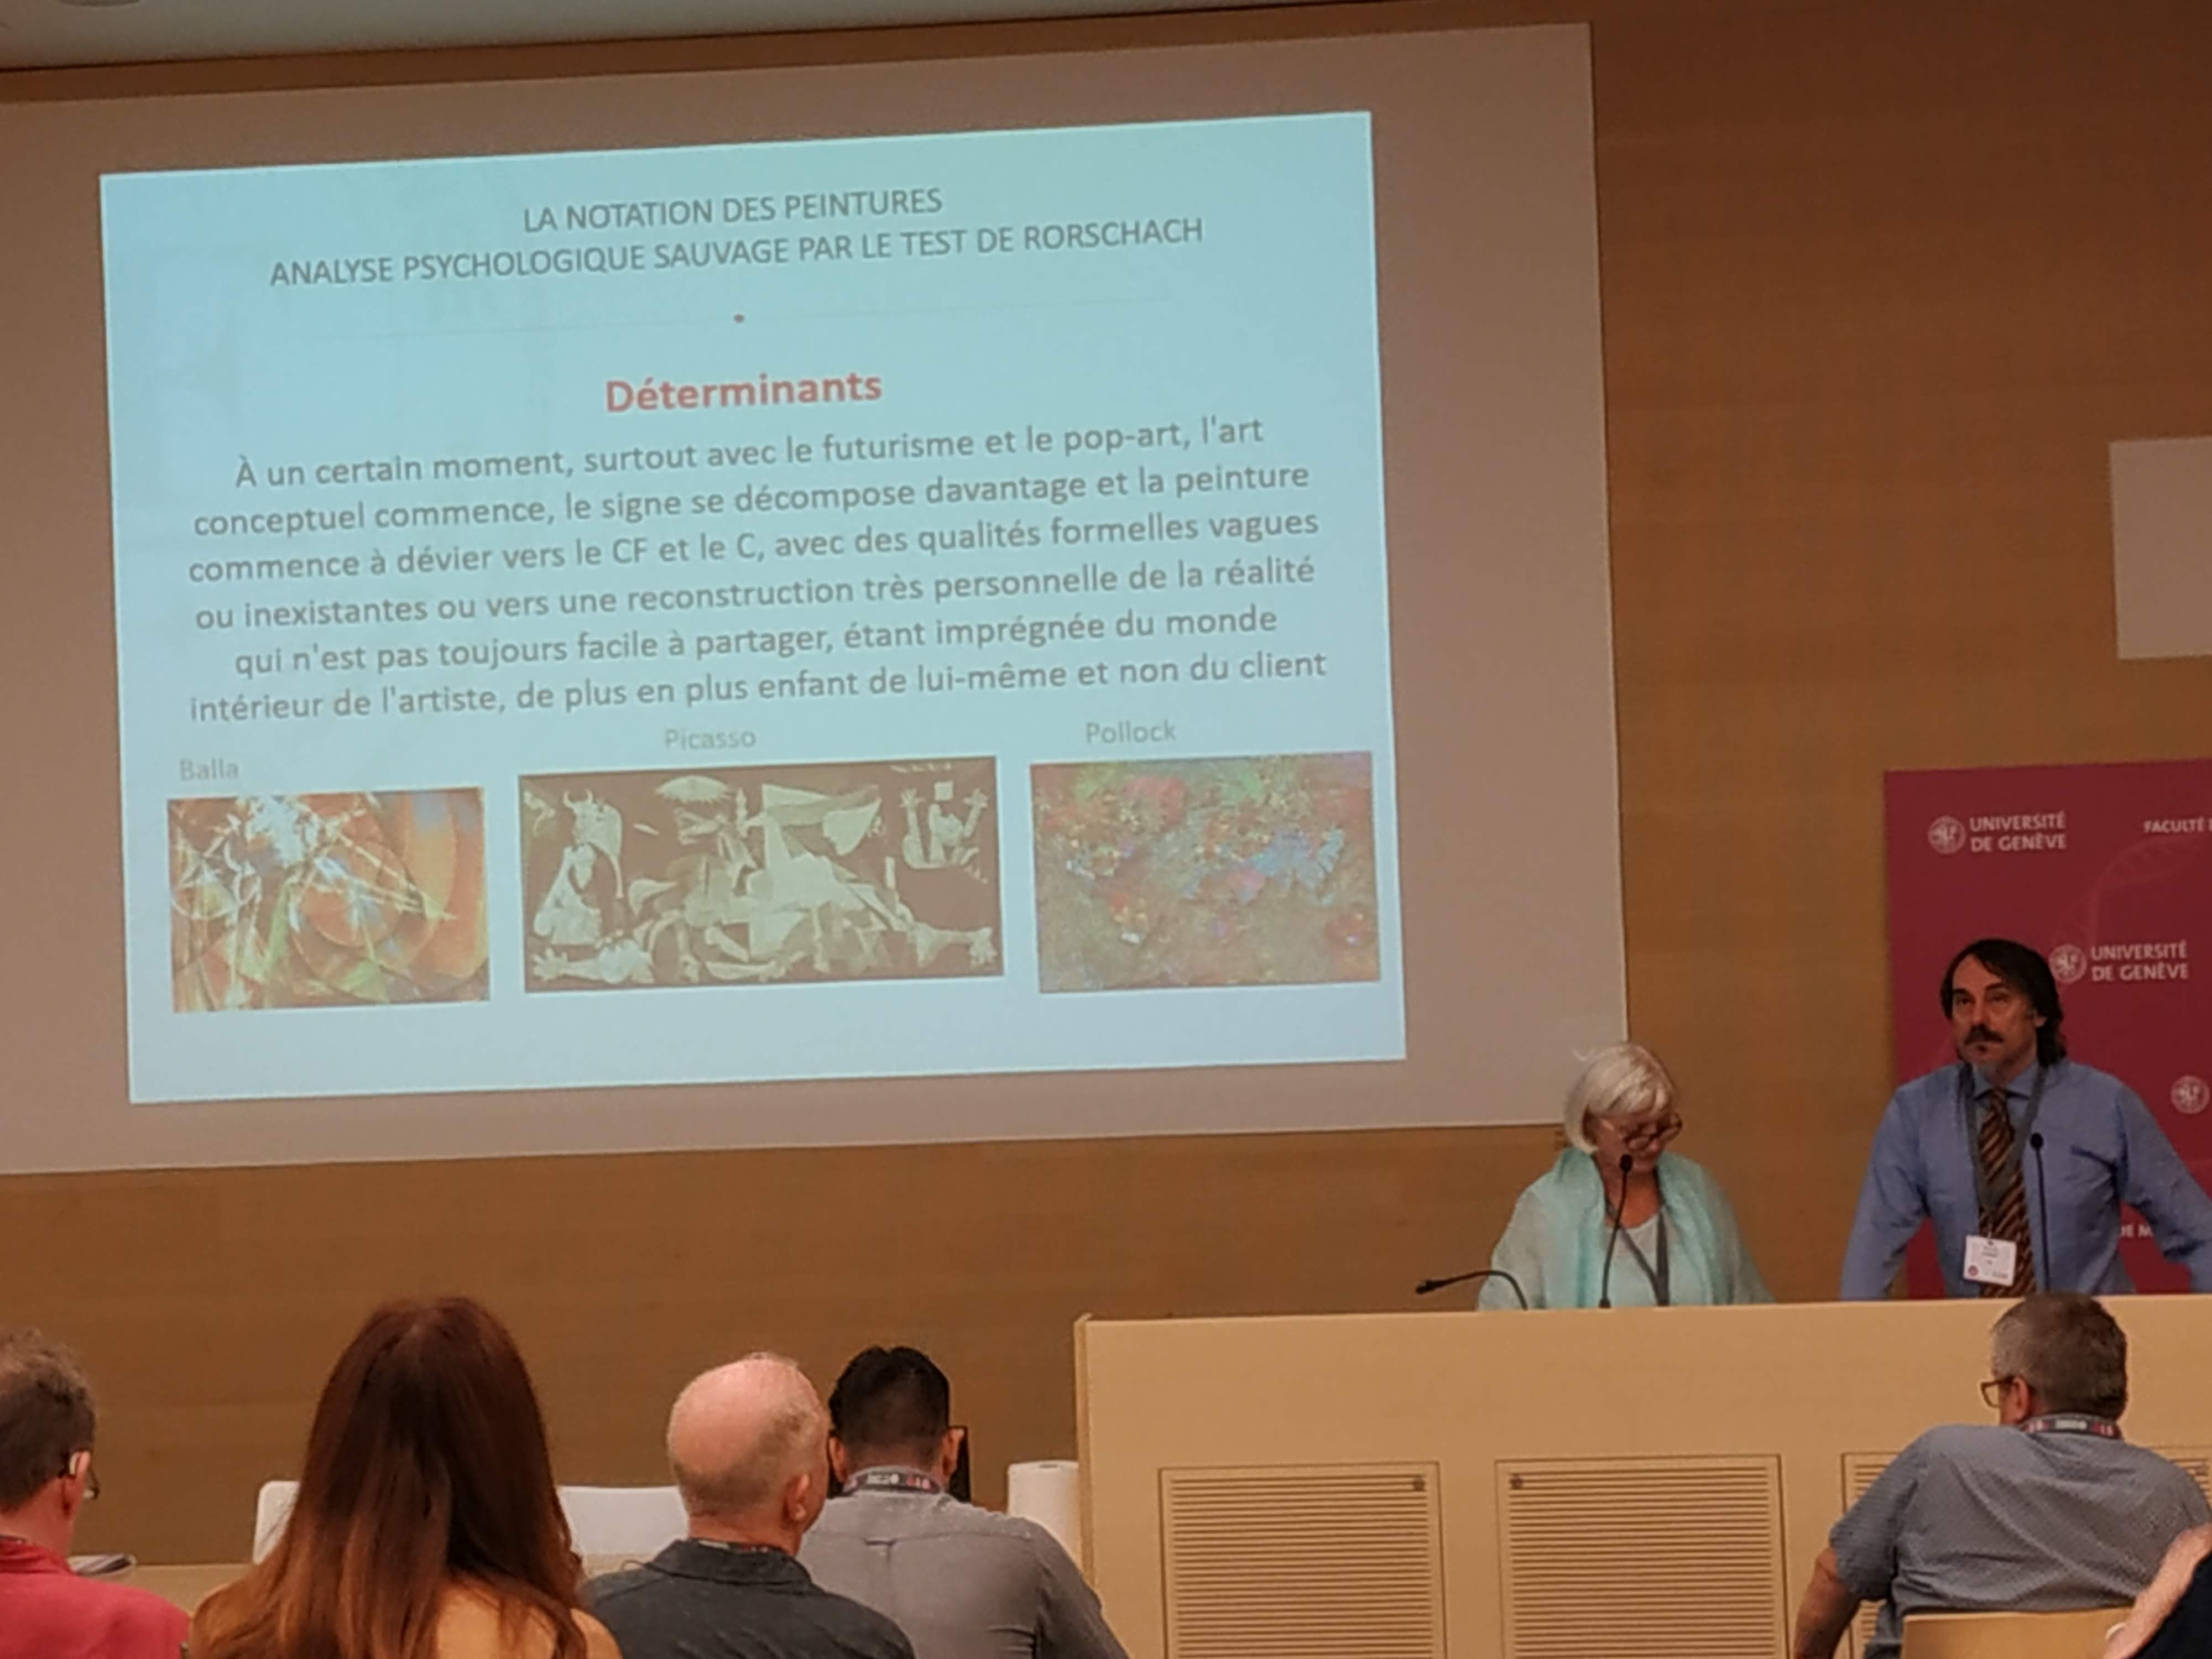 Oral presentation: The scoring of painting, wild psychological analysis through Rorschach test